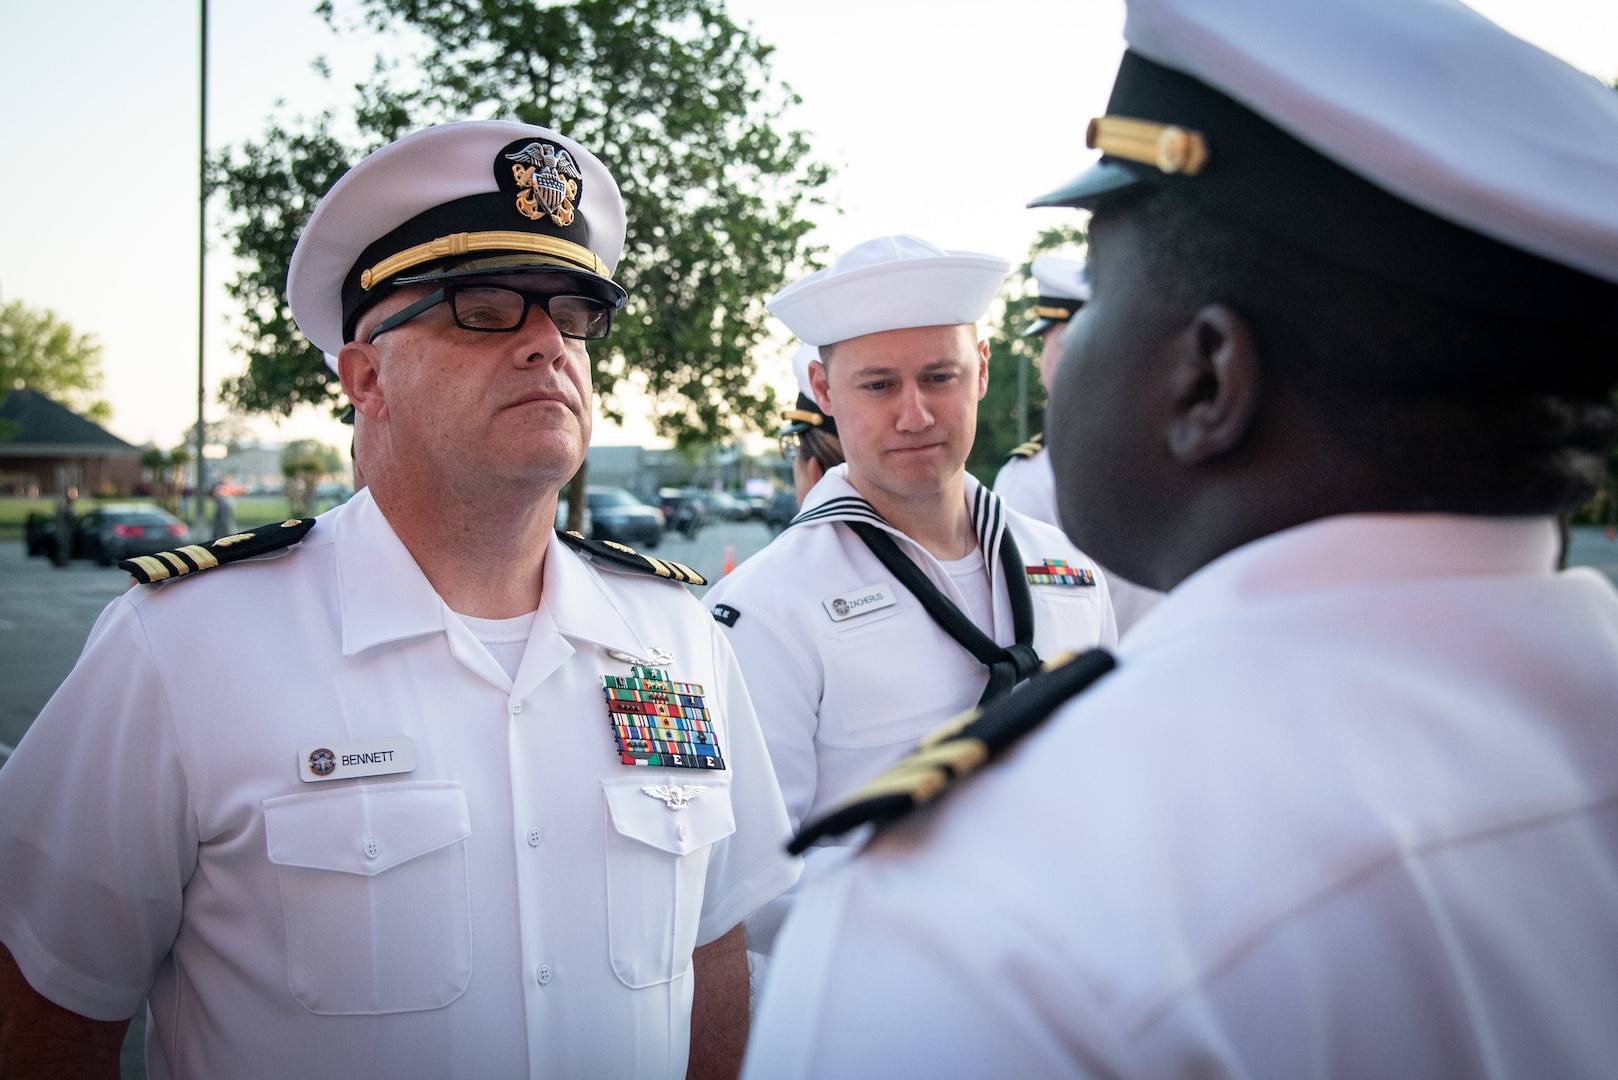 Lt. Cmdr. Carlton Bennett, left, inspects the Summer Whites uniform of Navy Lt. William Hookes Jr., right, as Hospital Corpsman Second Class Nathan Zachreus takes notes during a Summer Dress White inspection Thursday, April 20, 2023 aboard Marine Corps Air Station Cherry Point, North Carolina.  

The inspection provided Sailors serving aboard Naval Health Clinic Cherry Point an opportunity to participate in a Navy tradition, demonstrate attention to detail and celebrate the coming summer season.